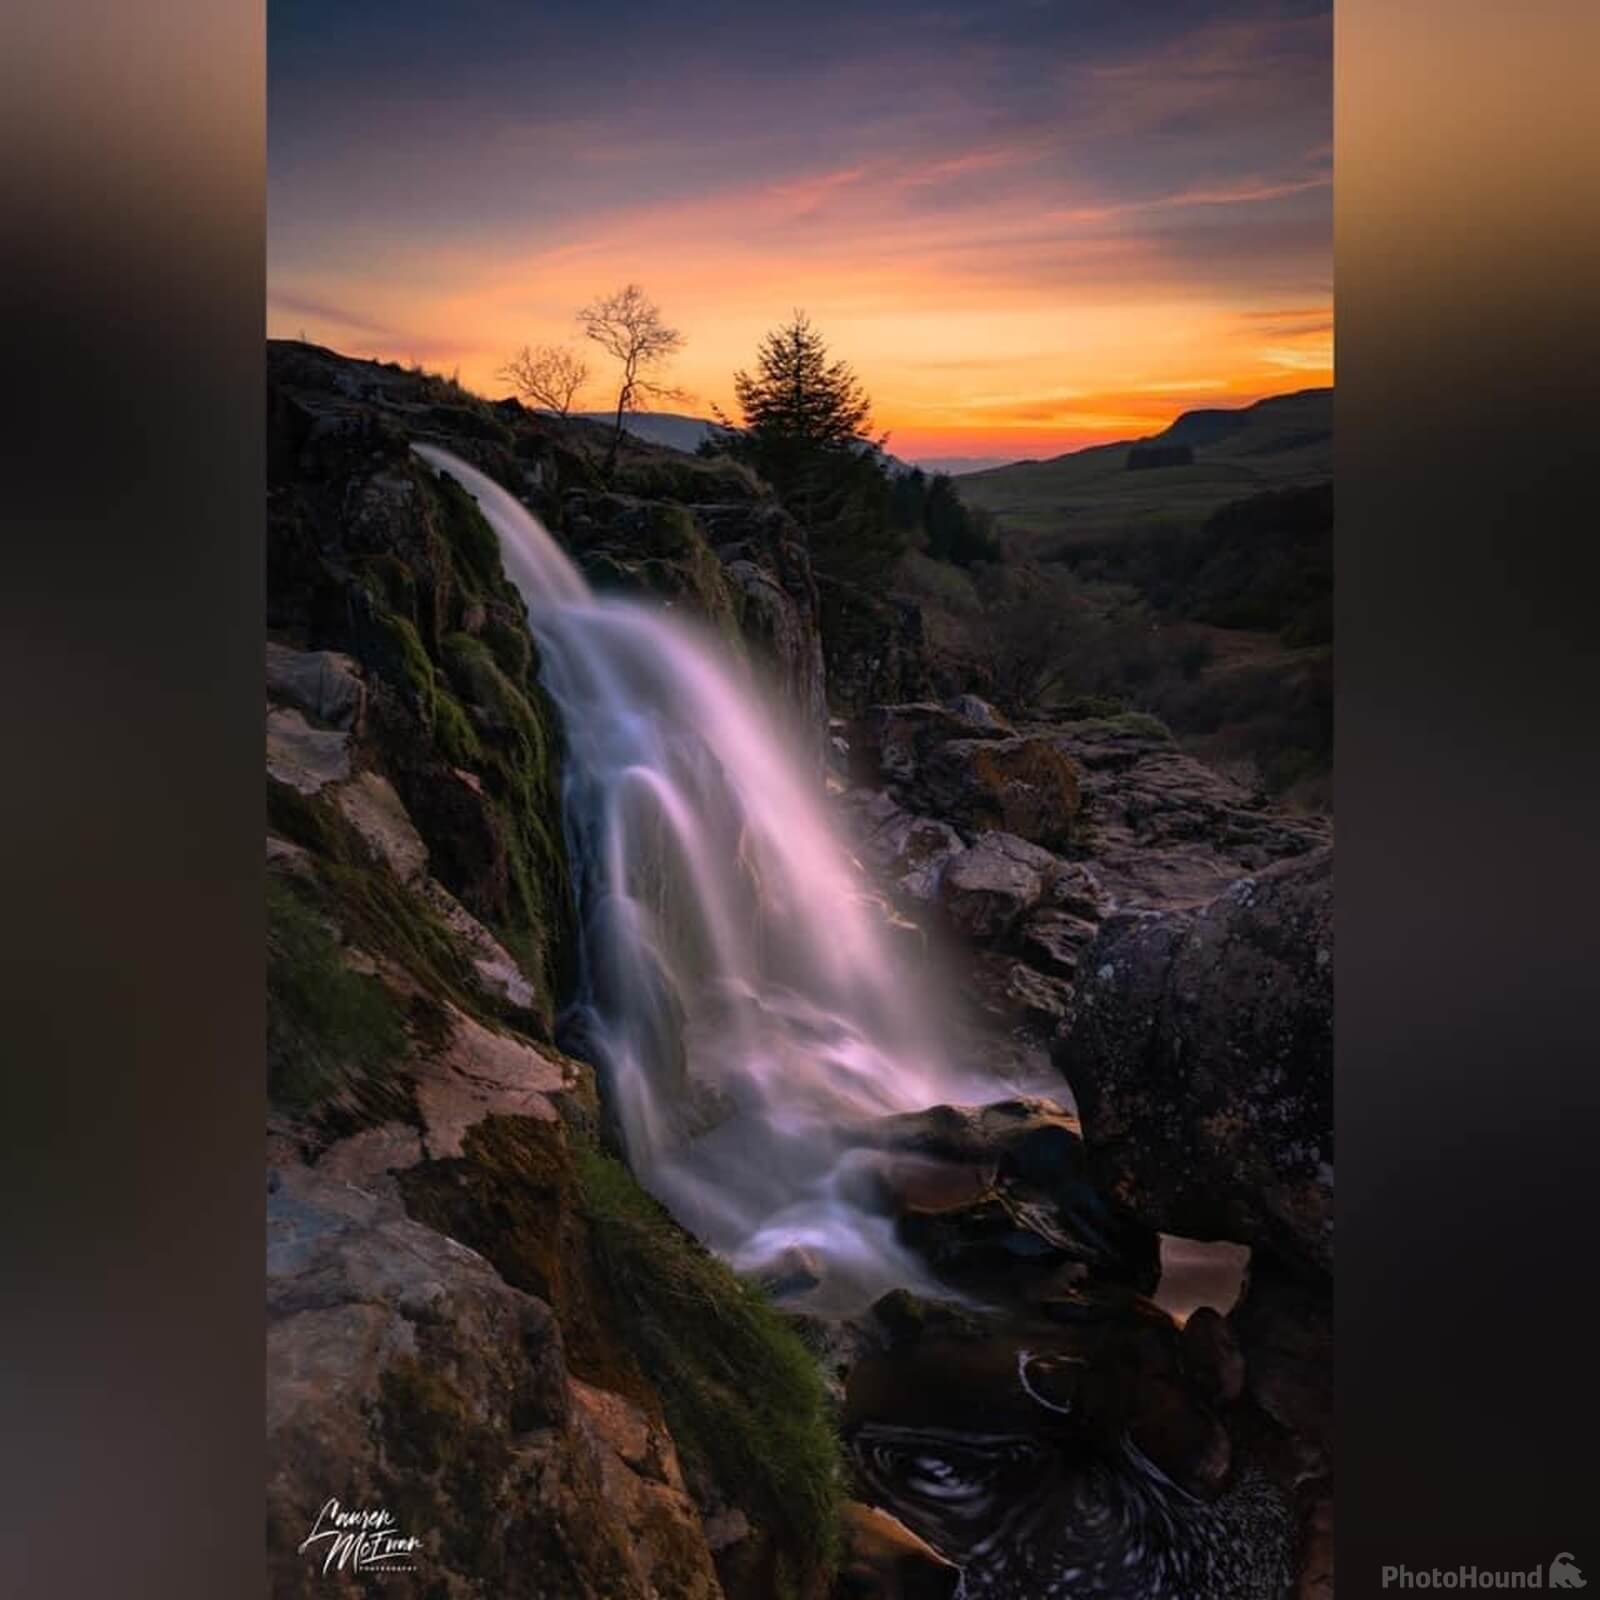 Image of The Loup of Fintry by Lauren McEwan